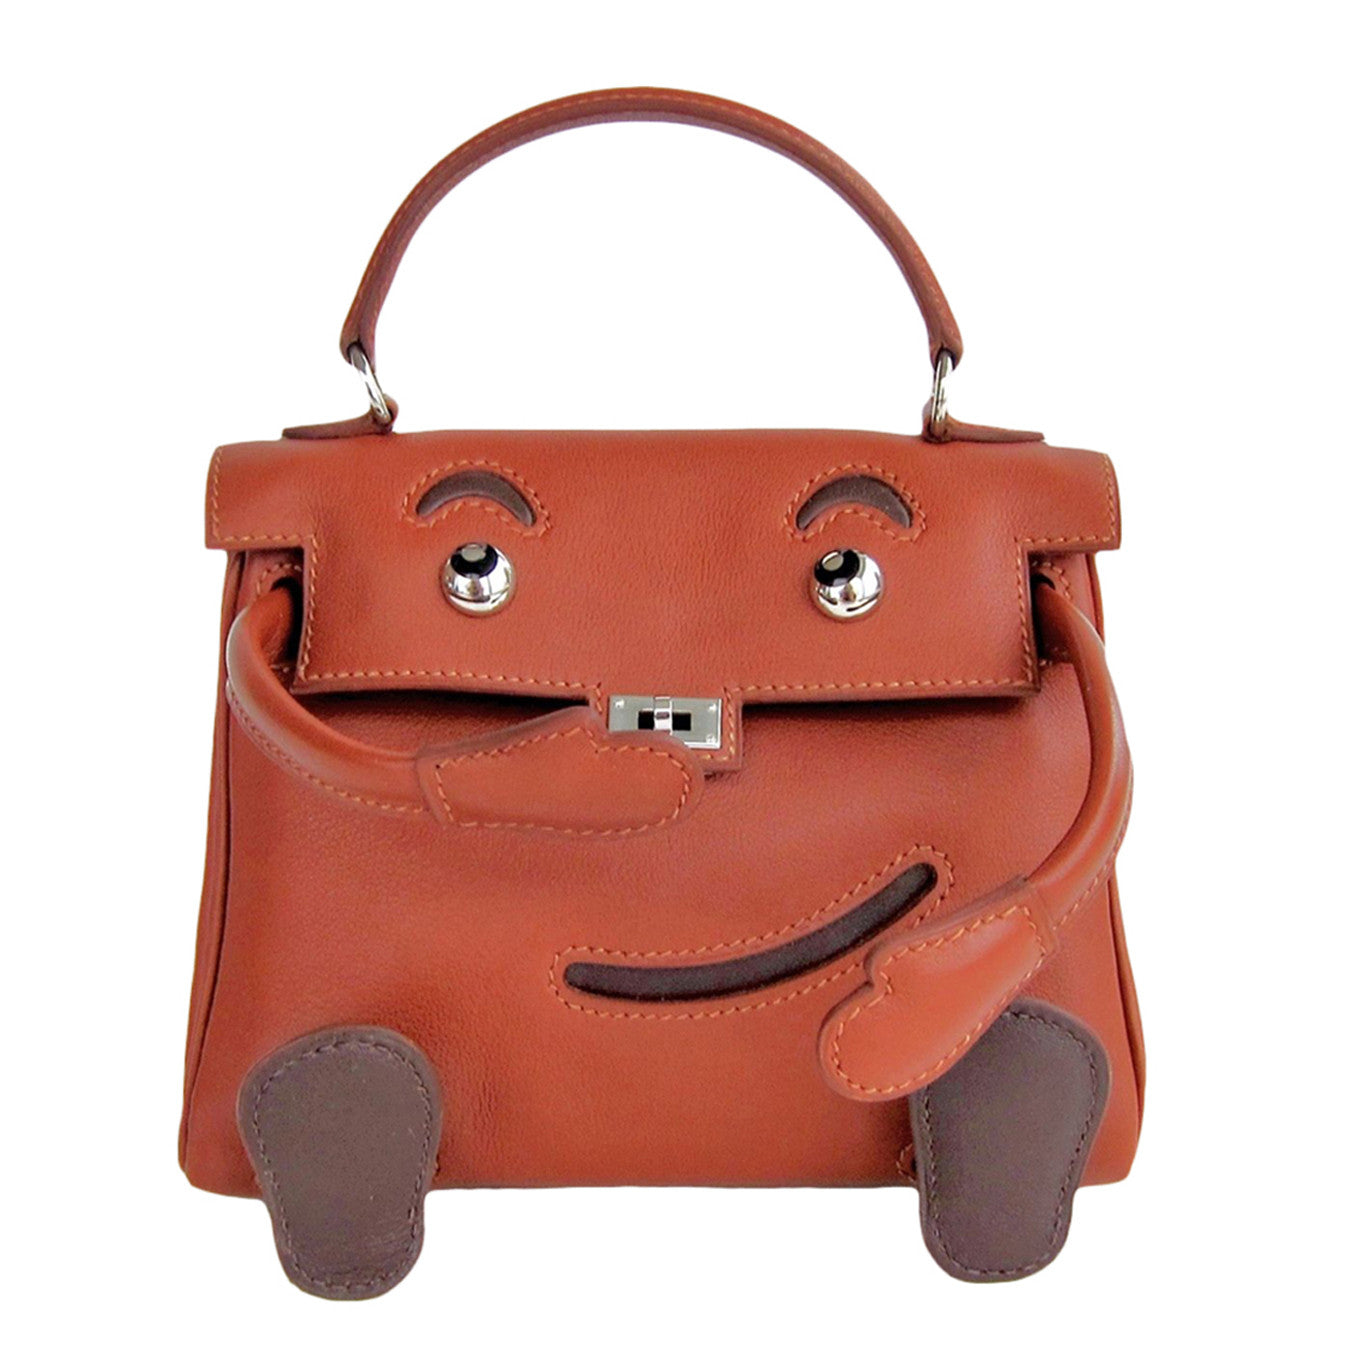 The Best Replica Hermes Kelly Pochette handbags Discount Price Is Waiting  For You